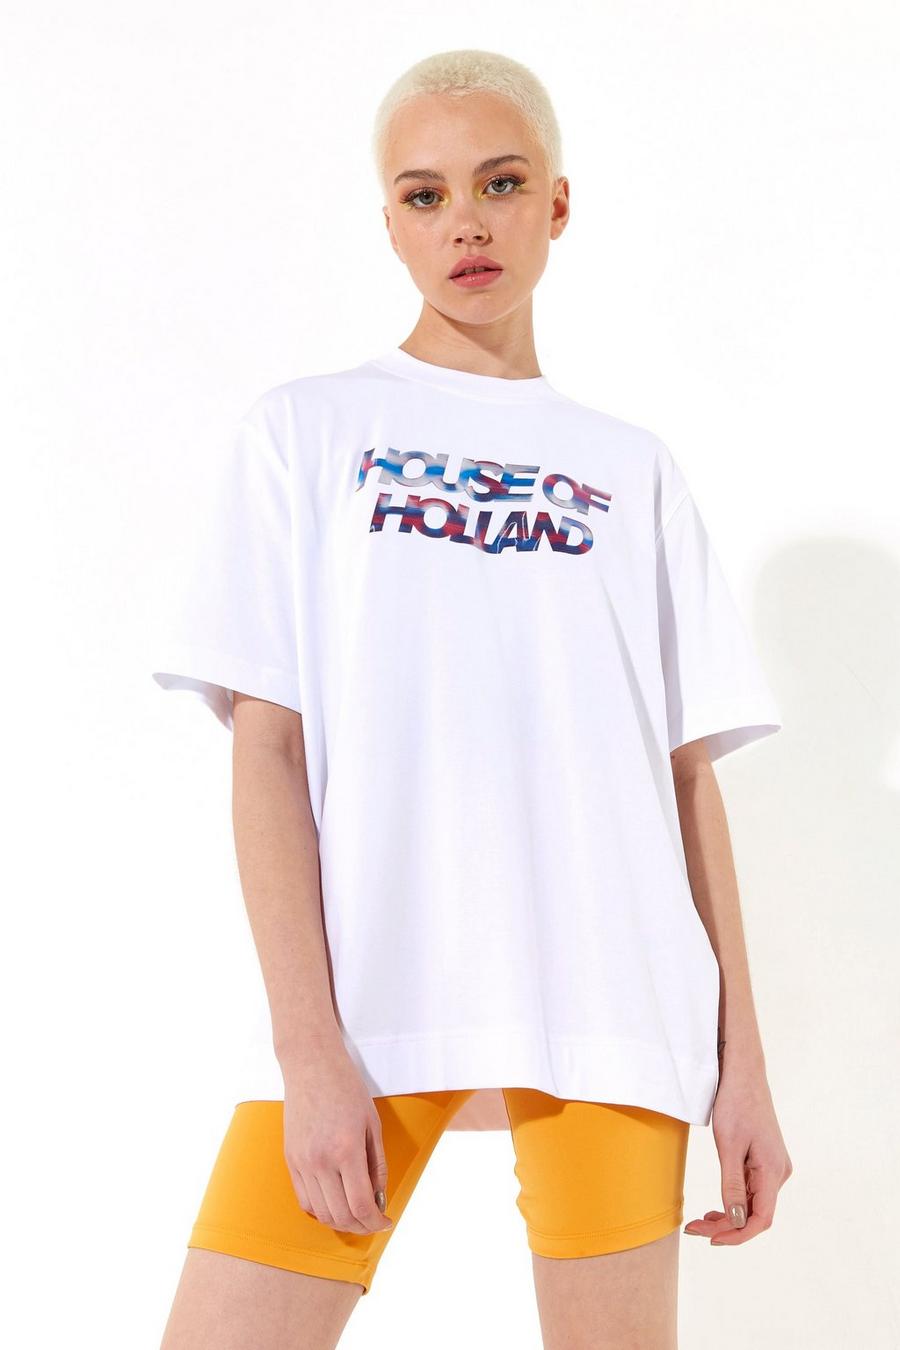 Iridescent Transfer Printed T-Shirt in White